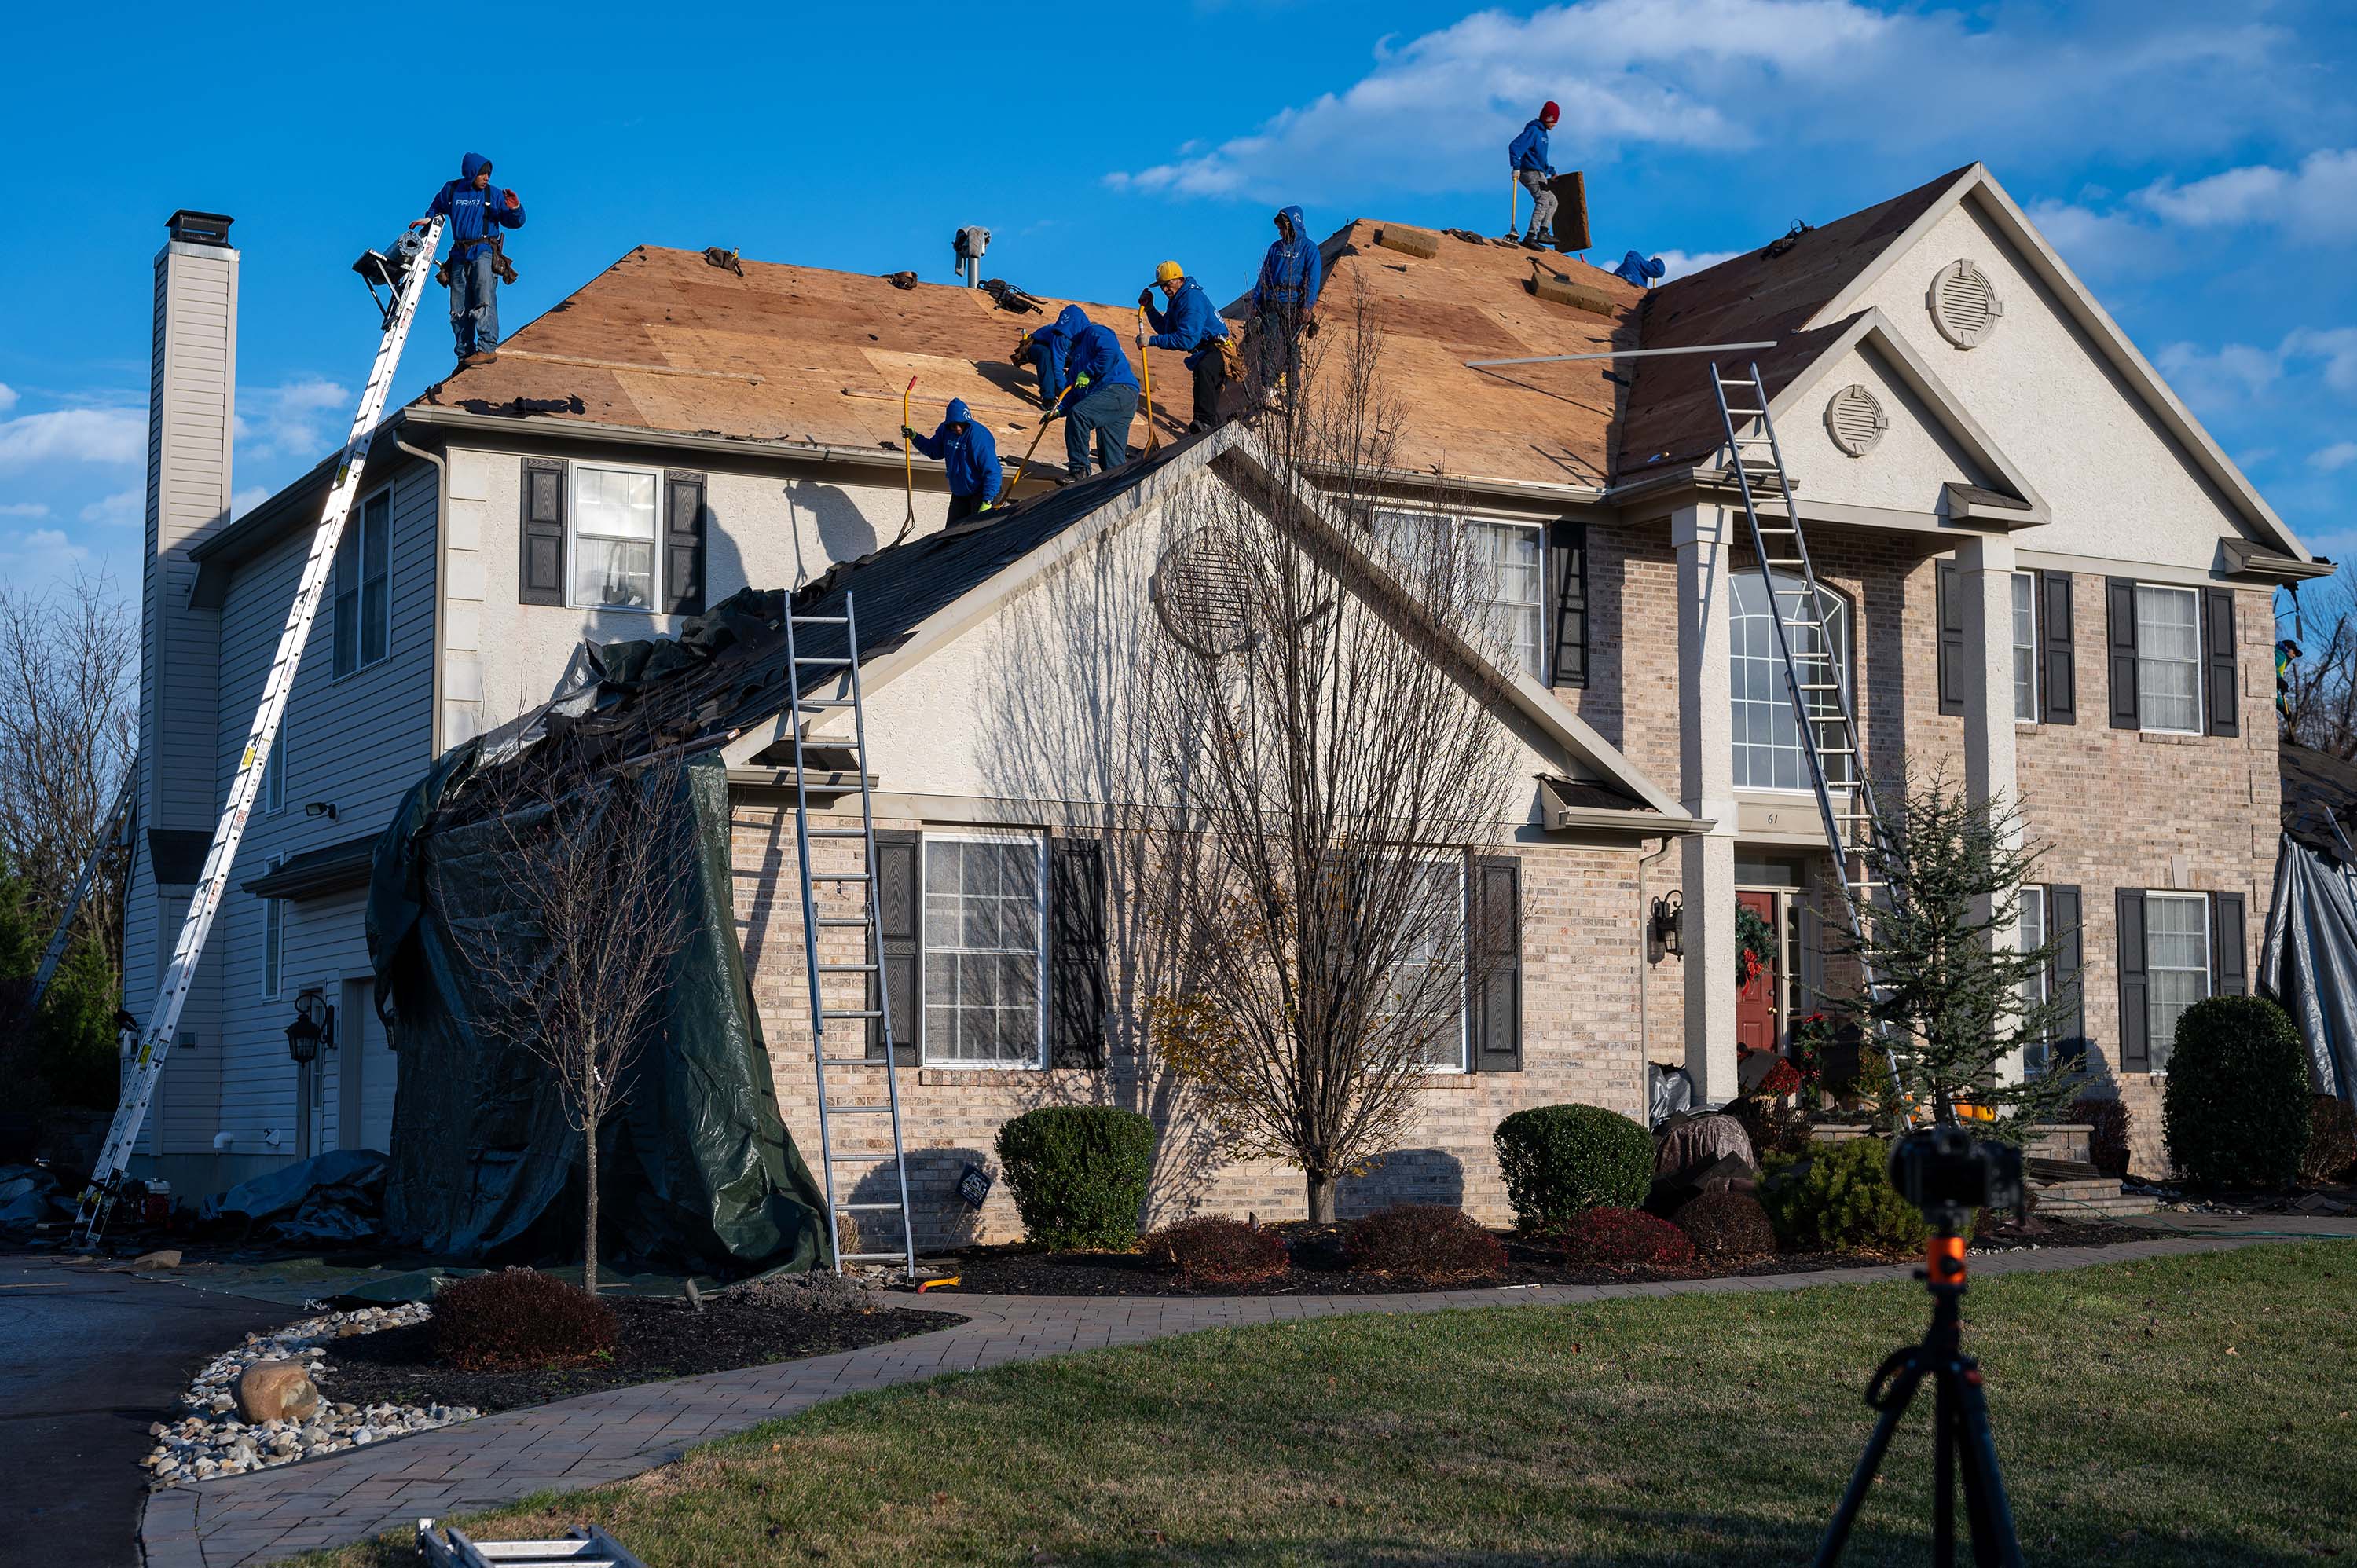 New Jersey Roof repair company - residential roofing contractors in Cherry Hill (large image)